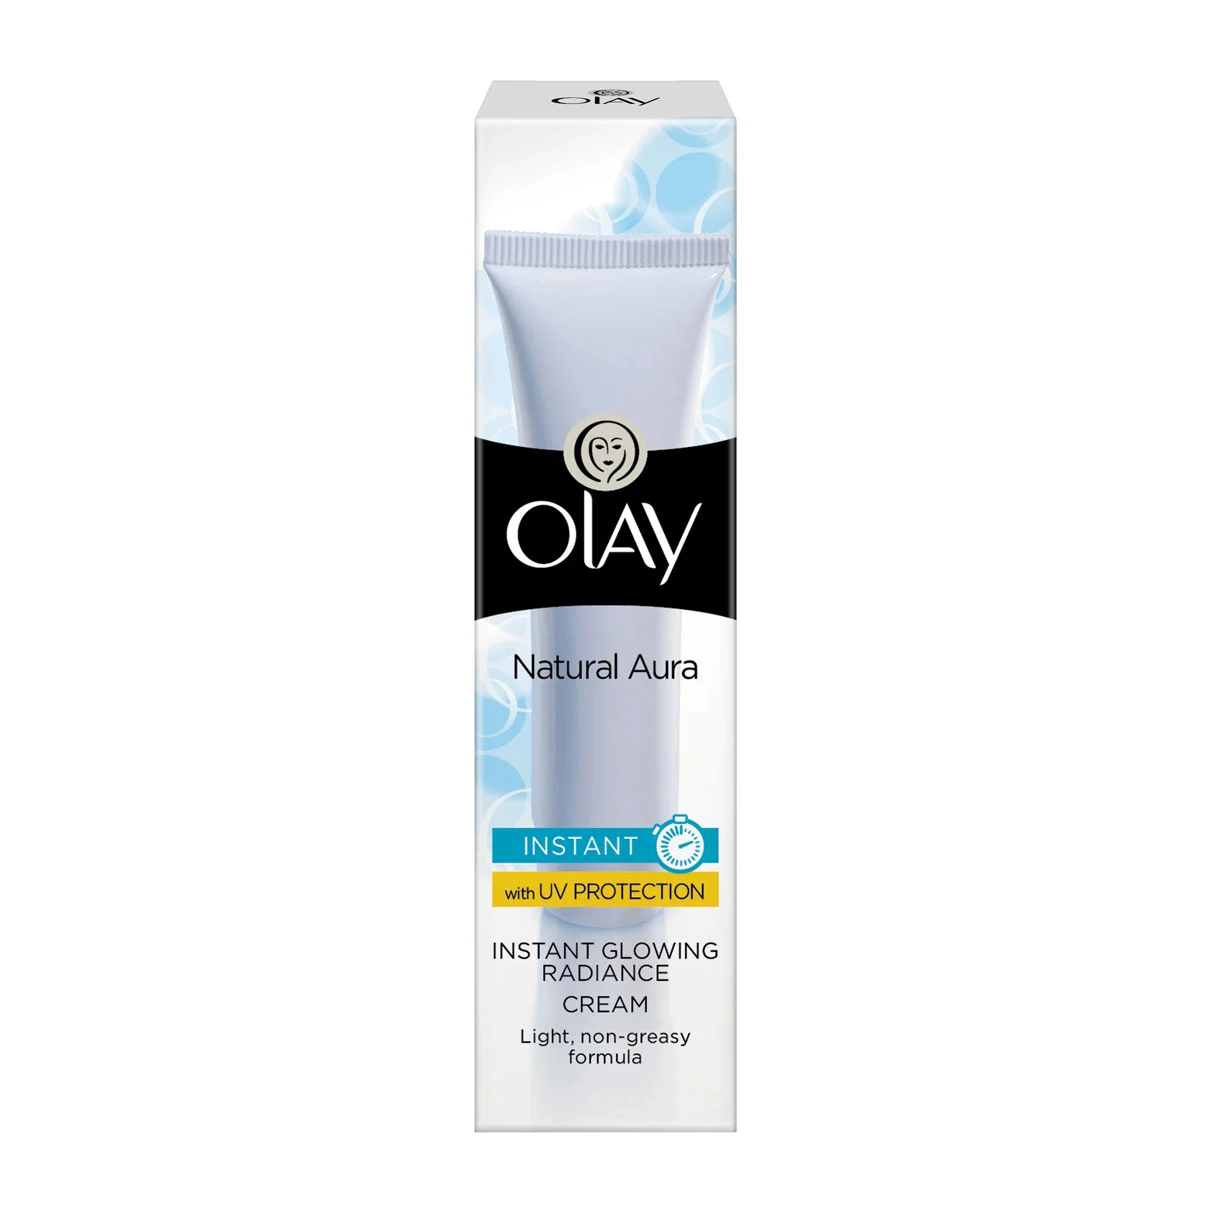 Olay Natural Aura 3-IN-1 Fairness UV Protection